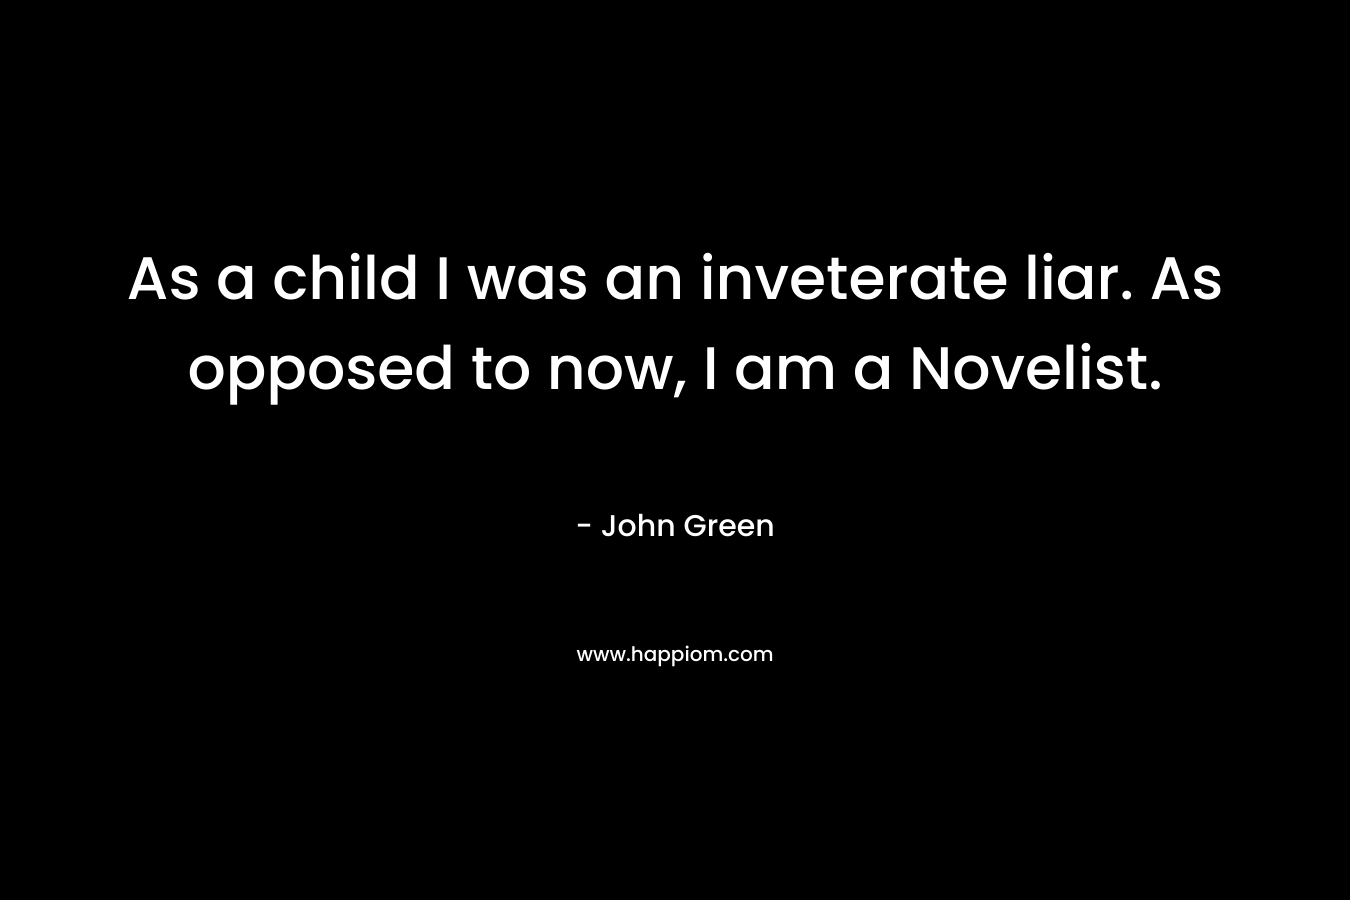 As a child I was an inveterate liar. As opposed to now, I am a Novelist. – John Green